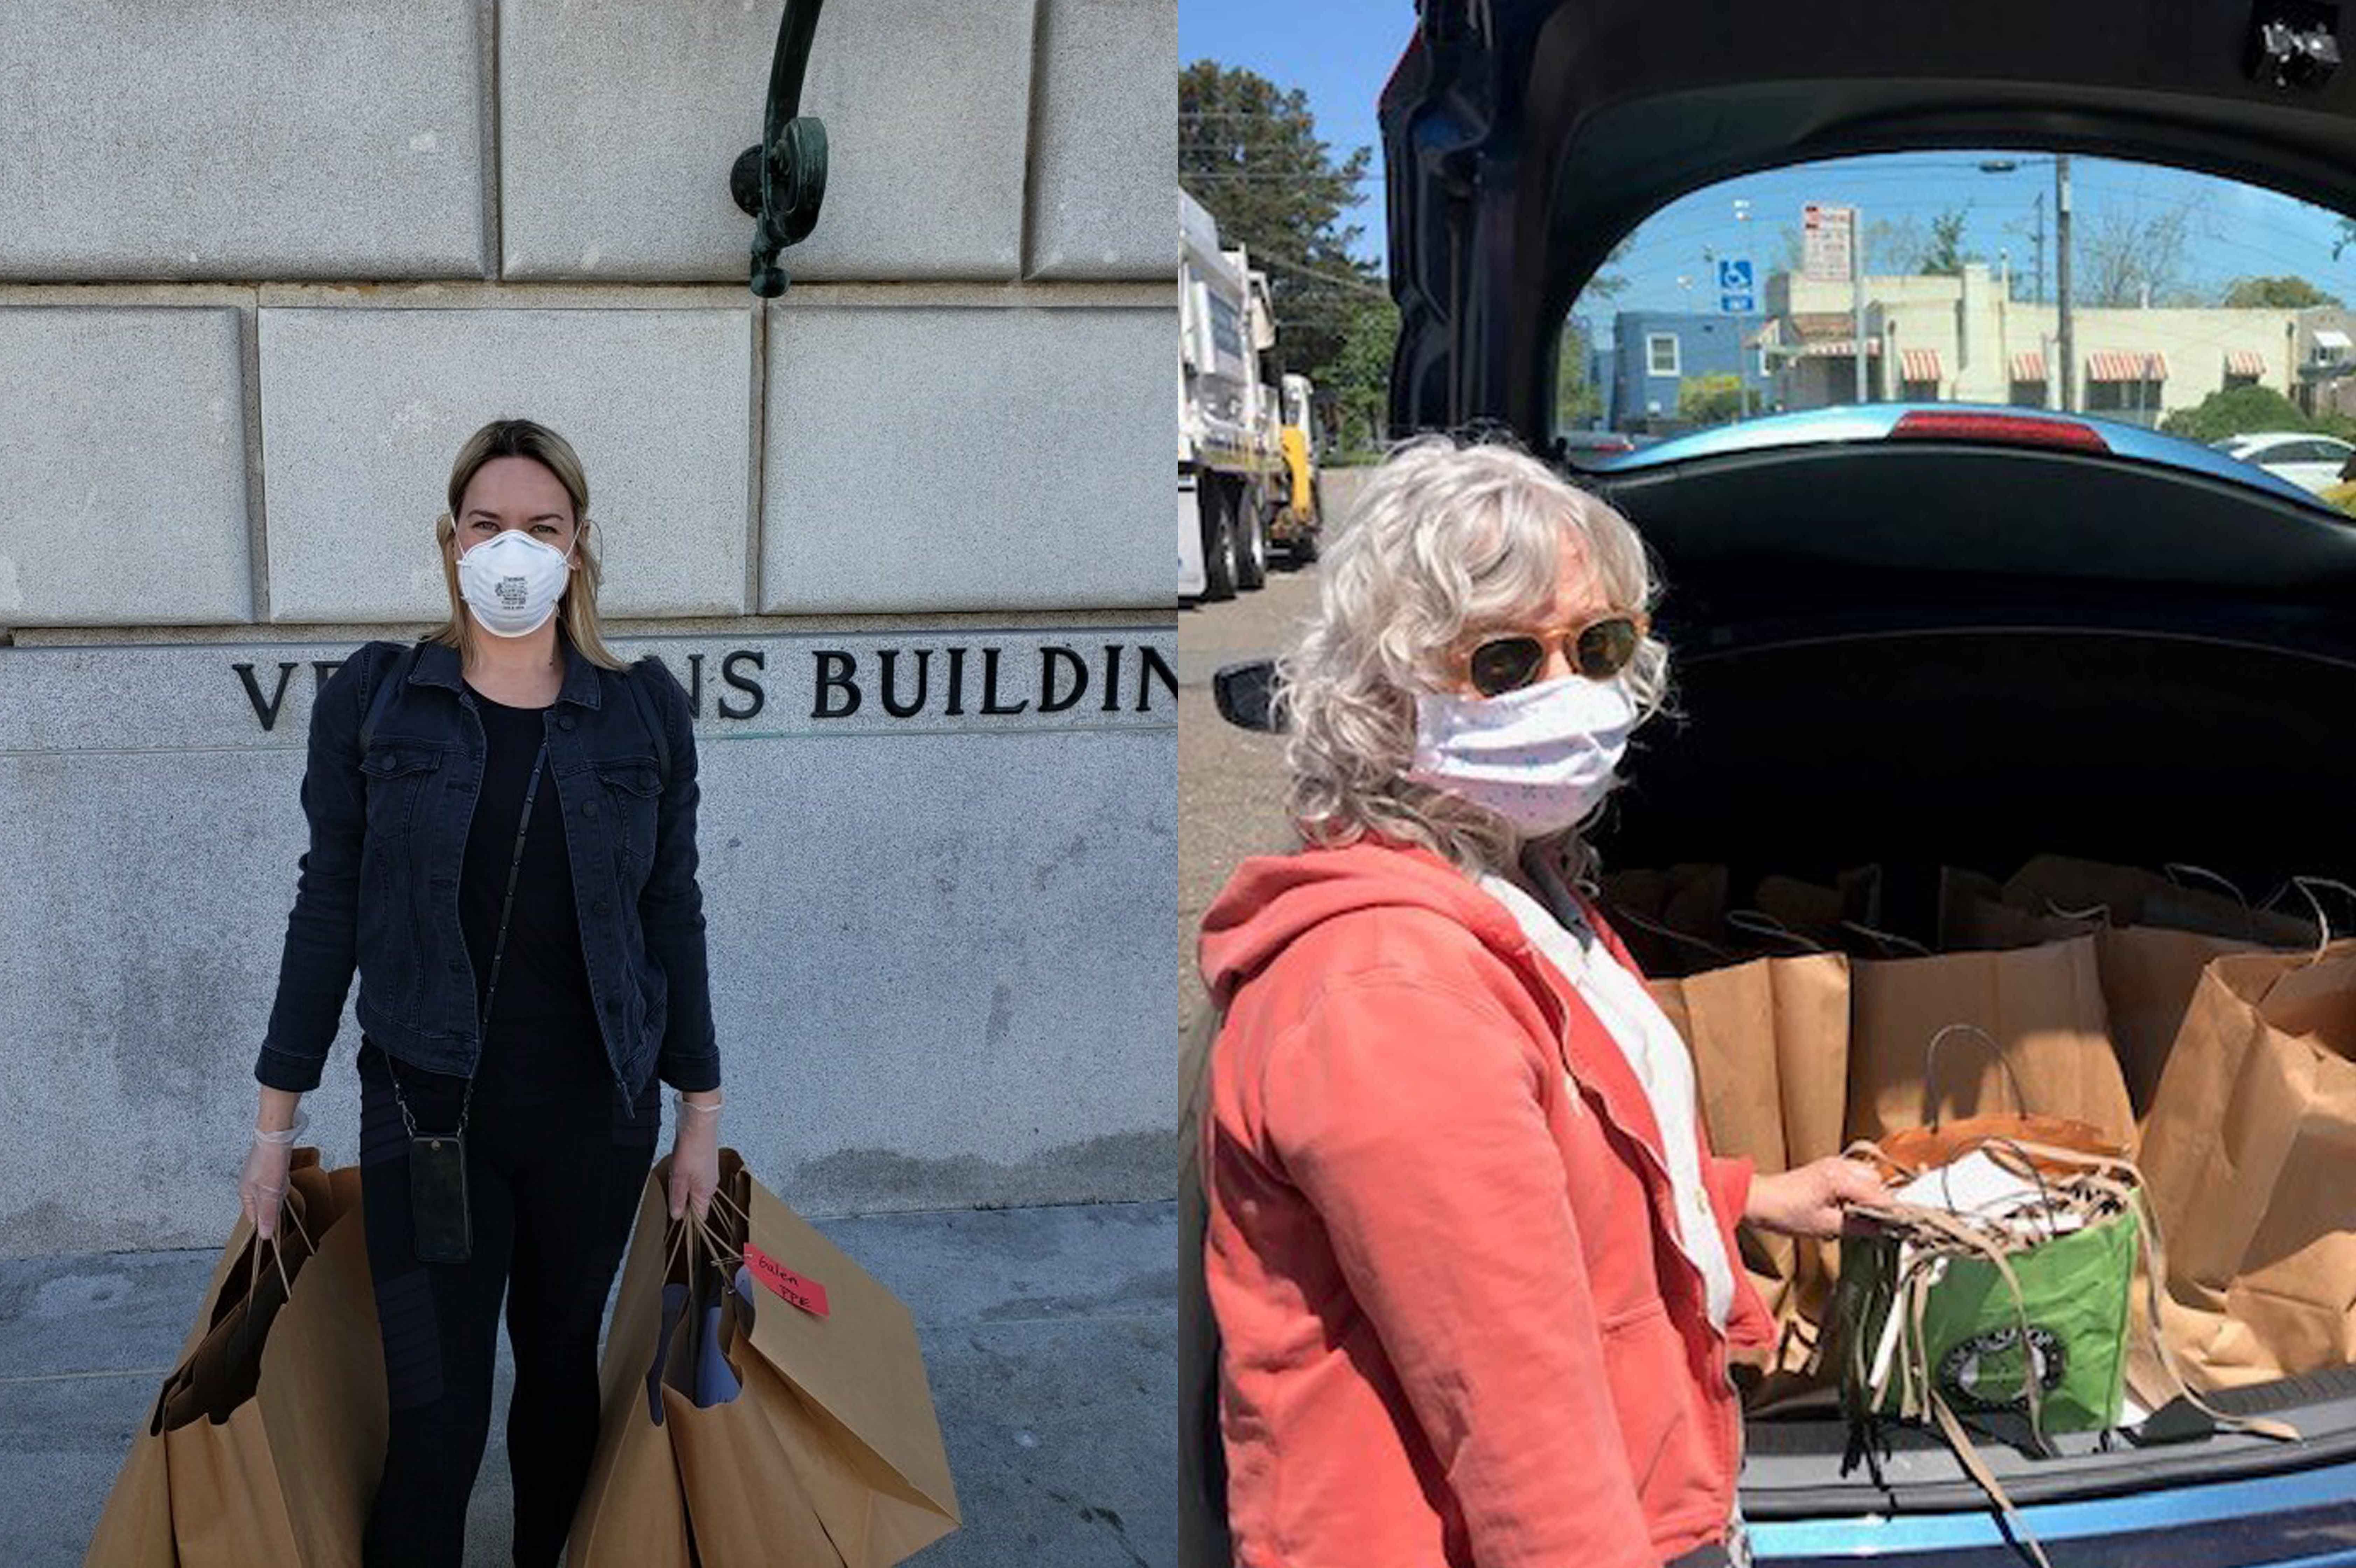 Costume Senior Production Supervisor Galen Till (left) preparing to deliver packets to members of our Costume Shop, and Costume Director Daniele McCartan (right) picking up the finished masks